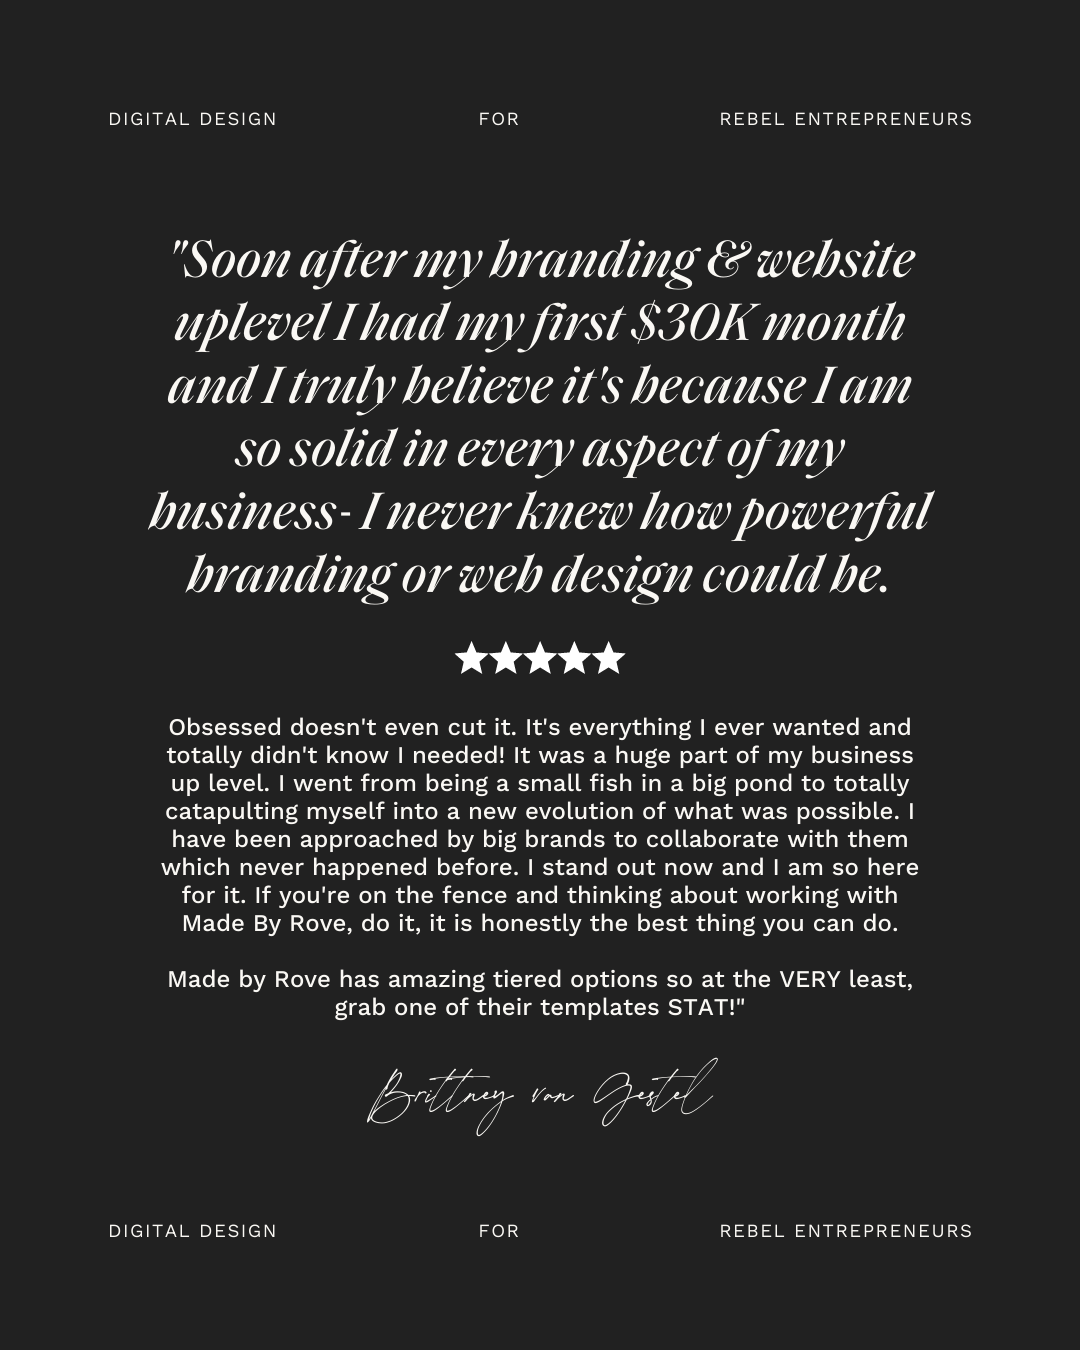 Client testimonial highlighting the importance of a great website when trying to build confidence as an entrepreneur